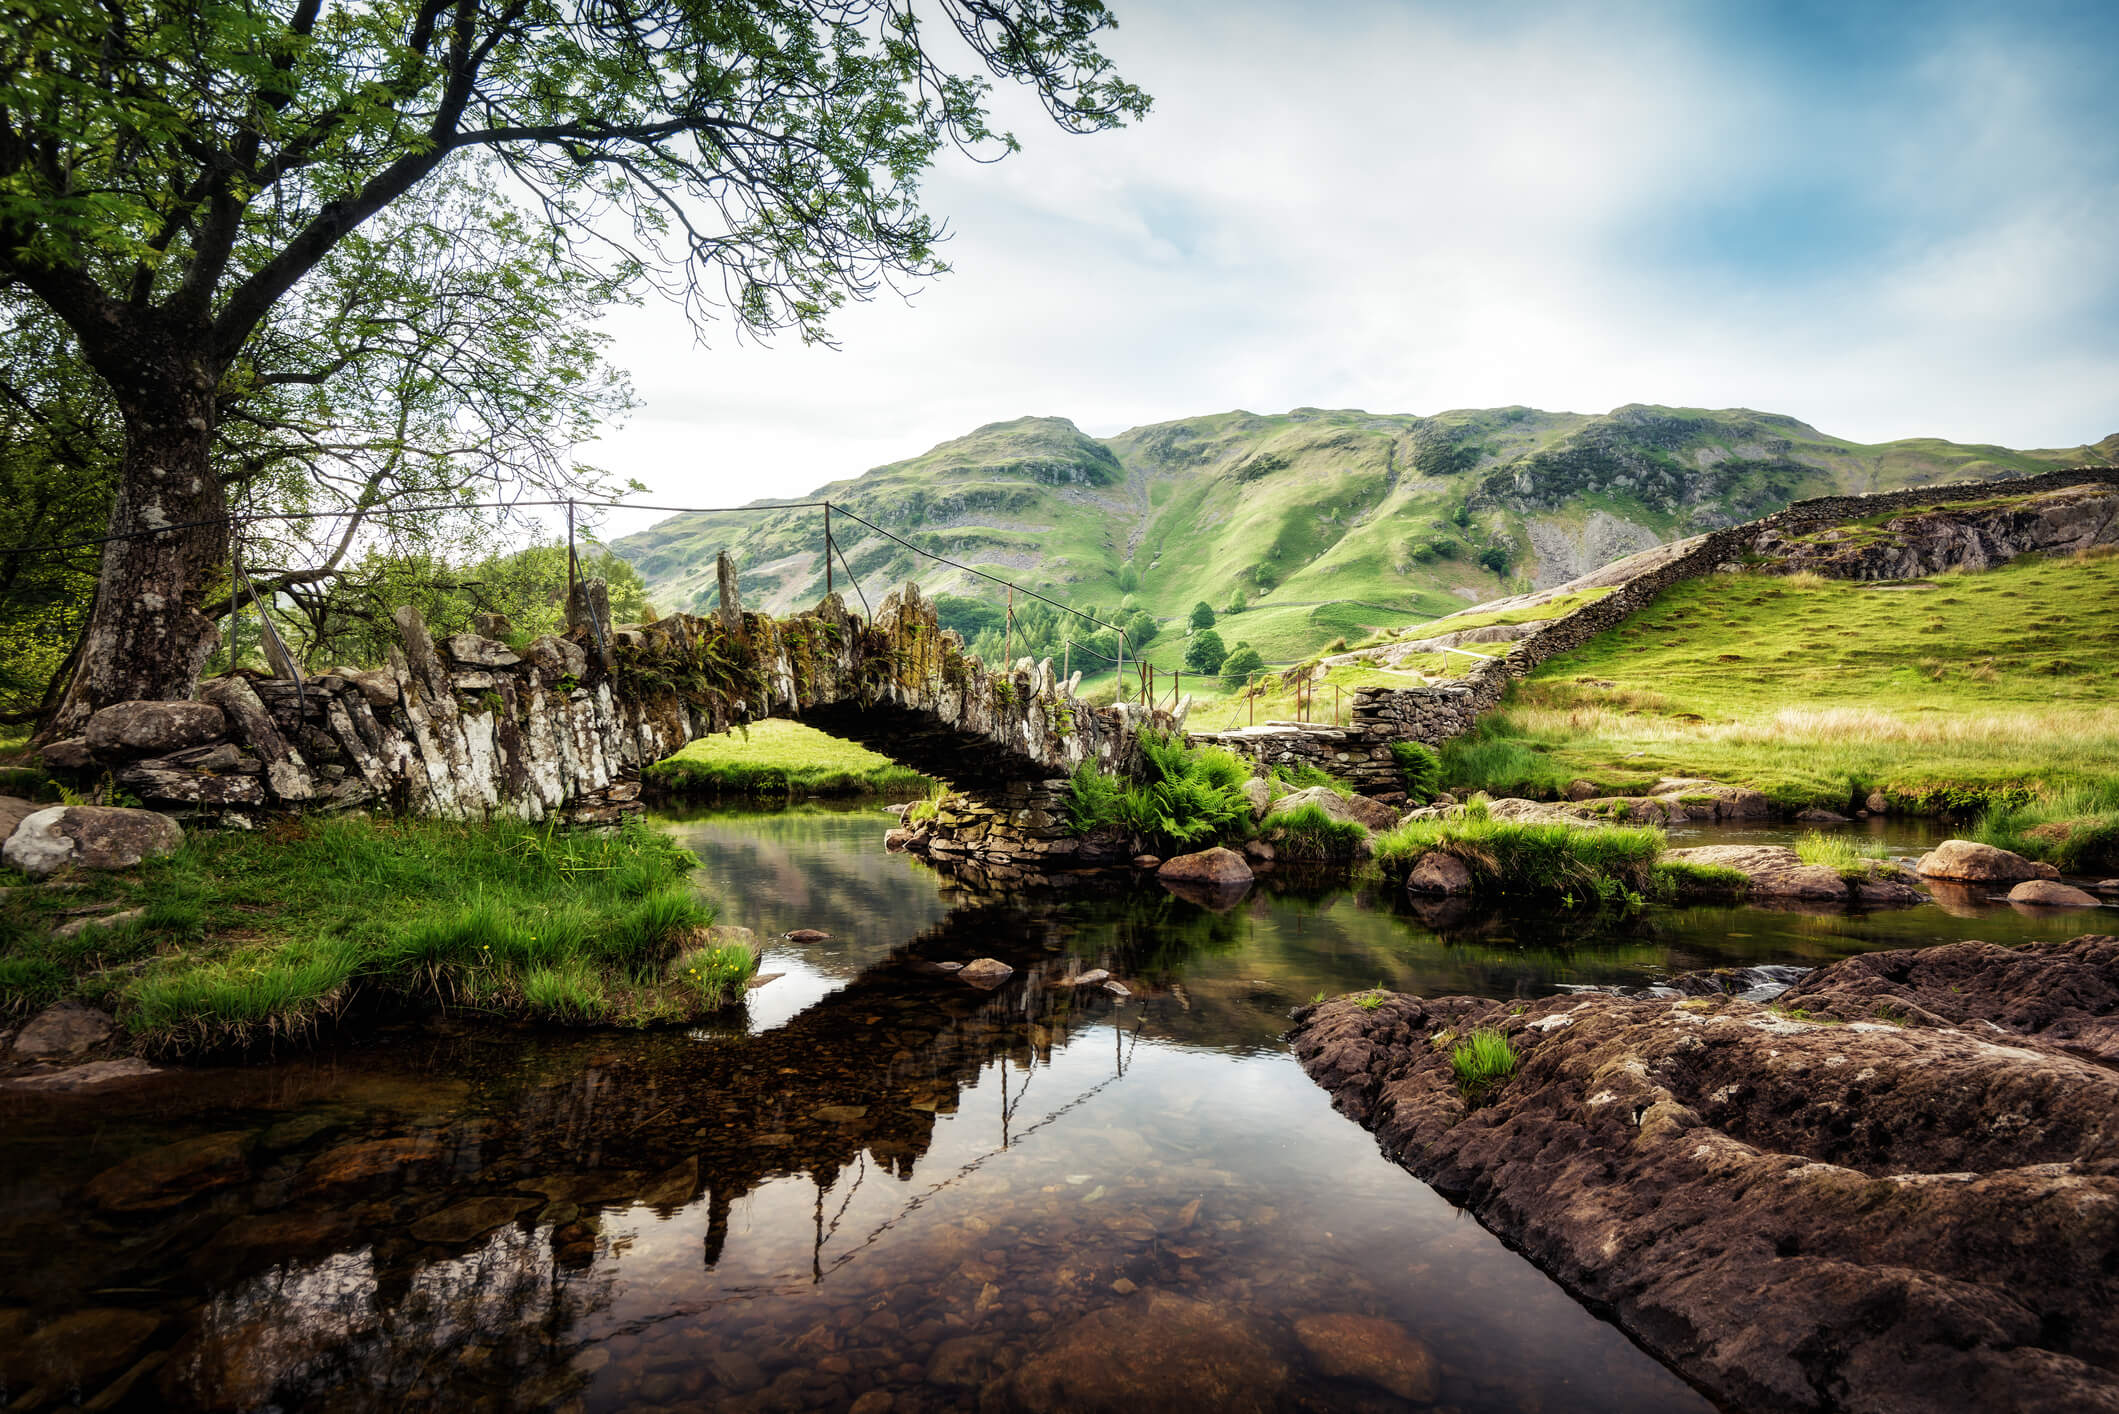 Slaters Bridge Lake District United Kingdom - traditional stone bridge over a river with green mountains in the background